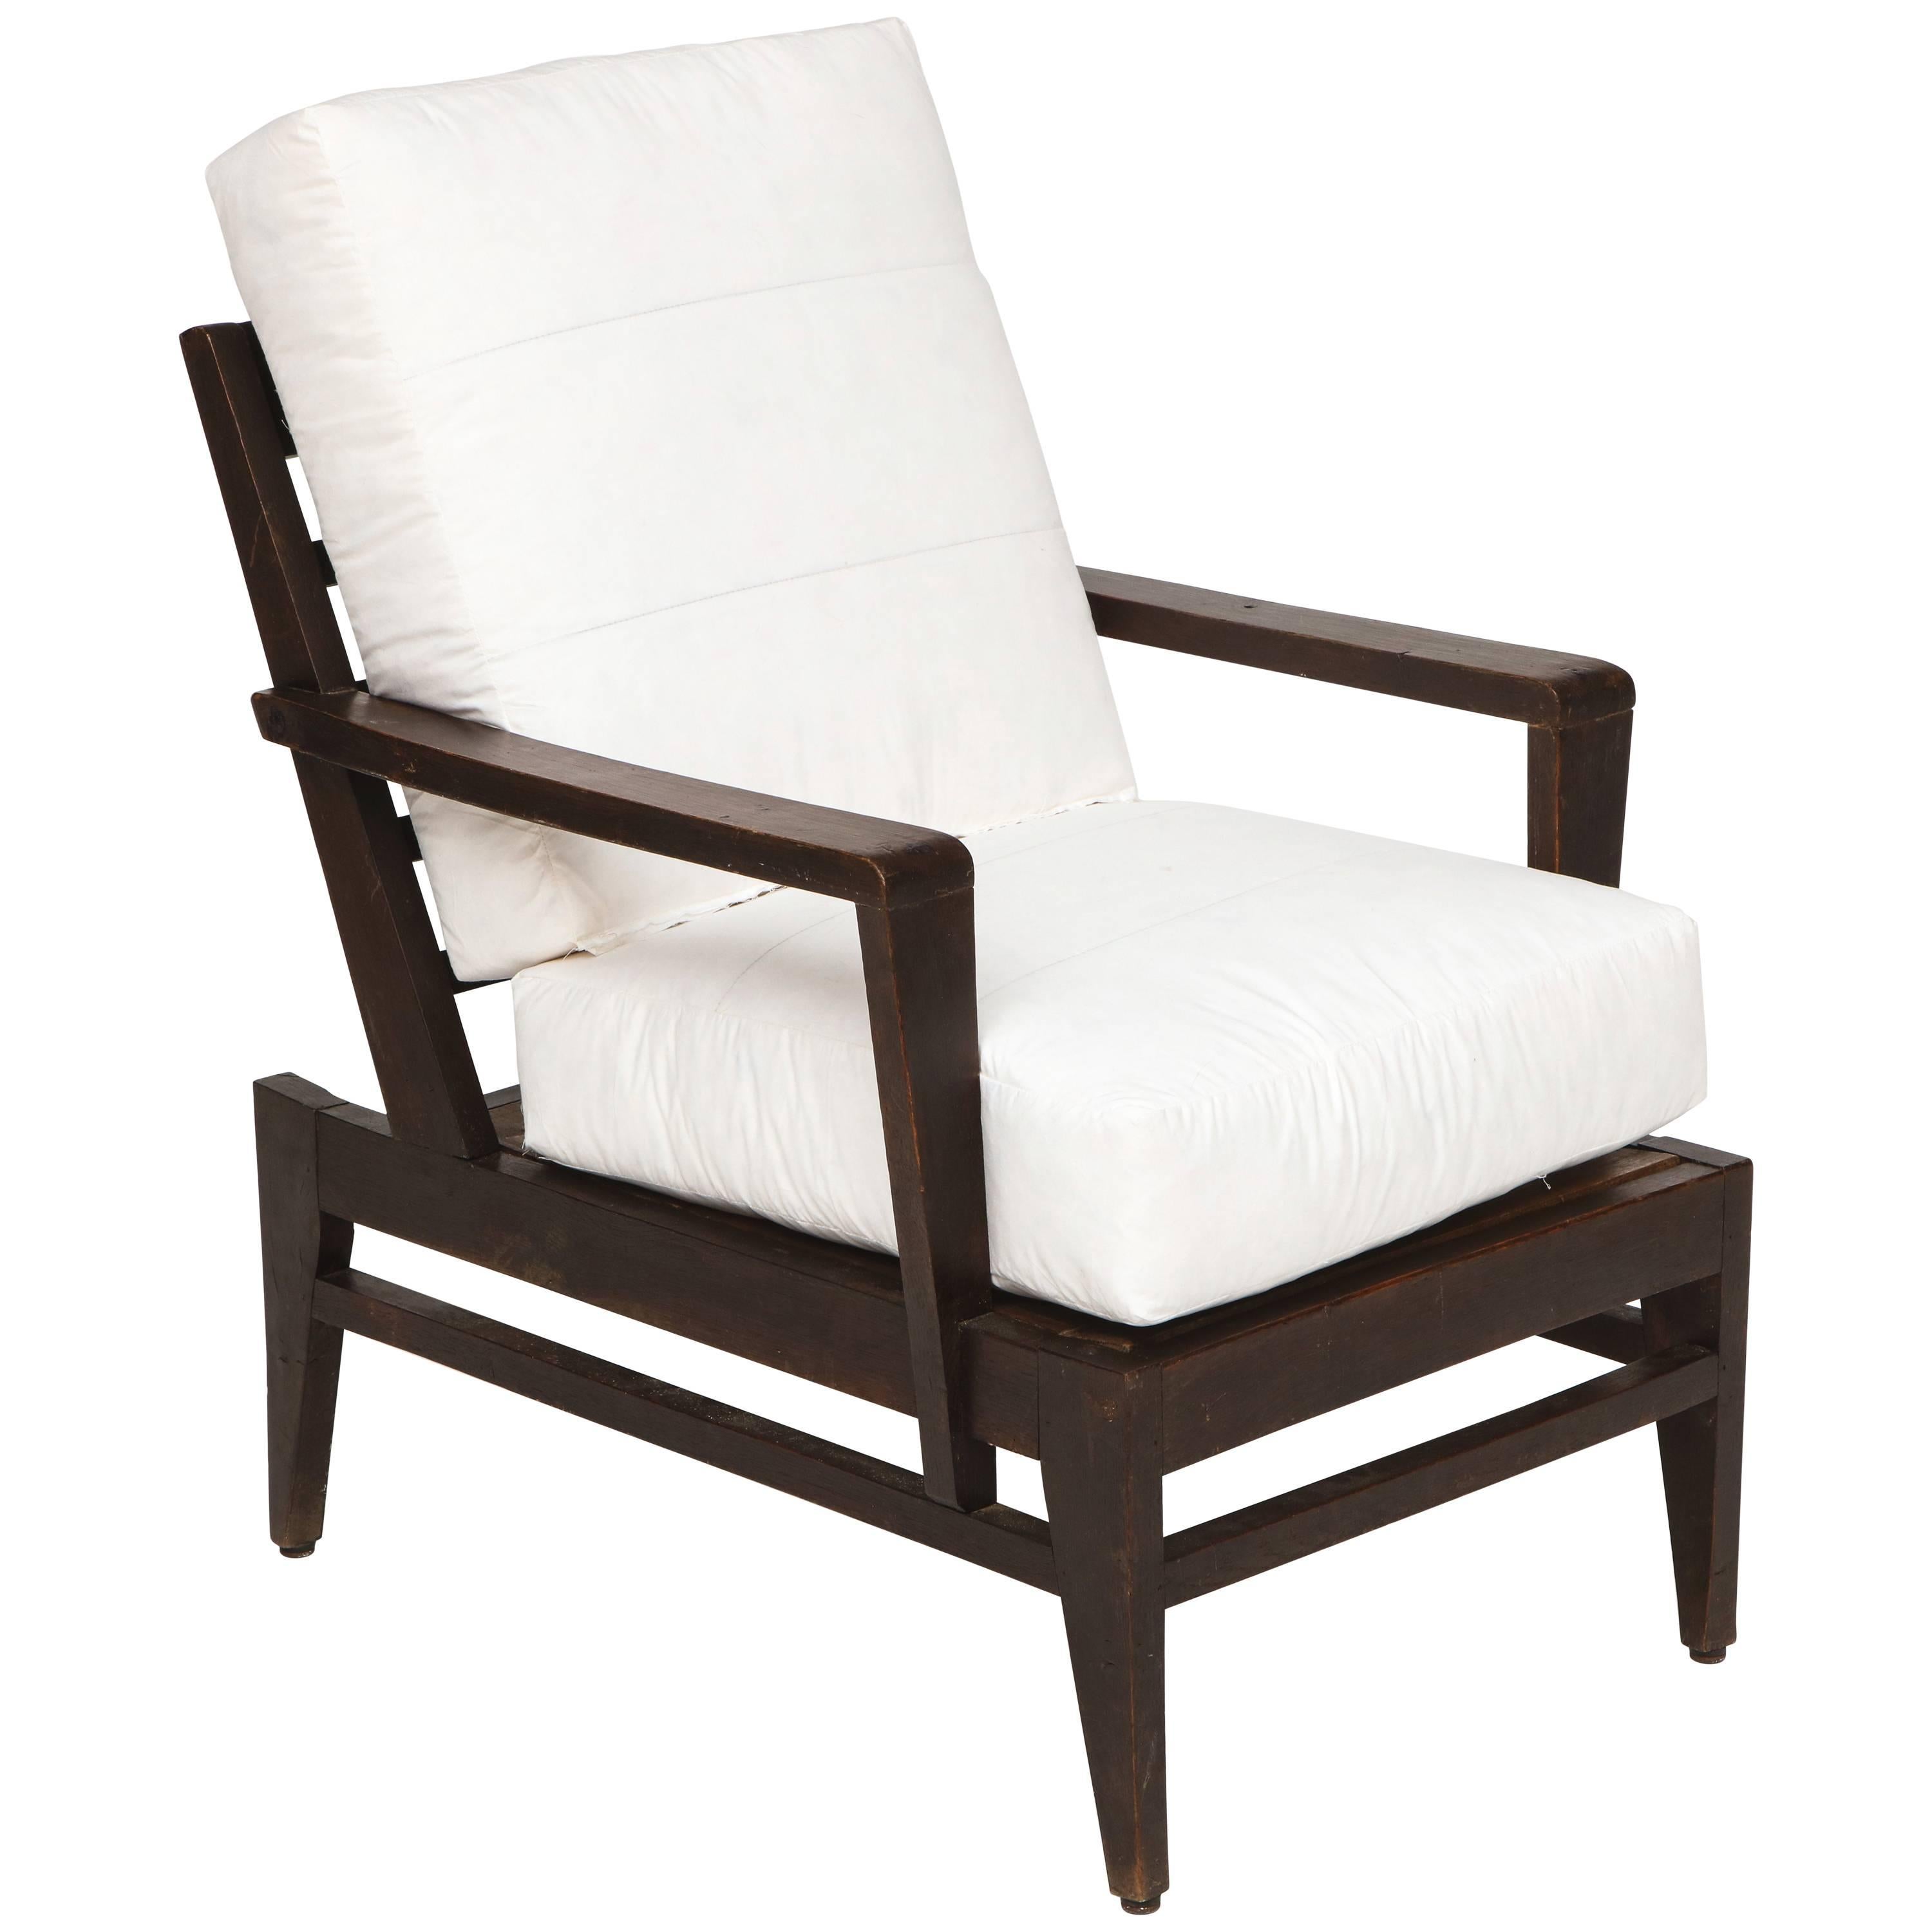 Rene Gabriel dark wood oak lounge chair white cushion midcentury, France, 1950s
Beautiful construction and bones. The chair currently has foam/down muslin cushions that can be upholstered in any fabric.
Beautiful furniture example of postwar